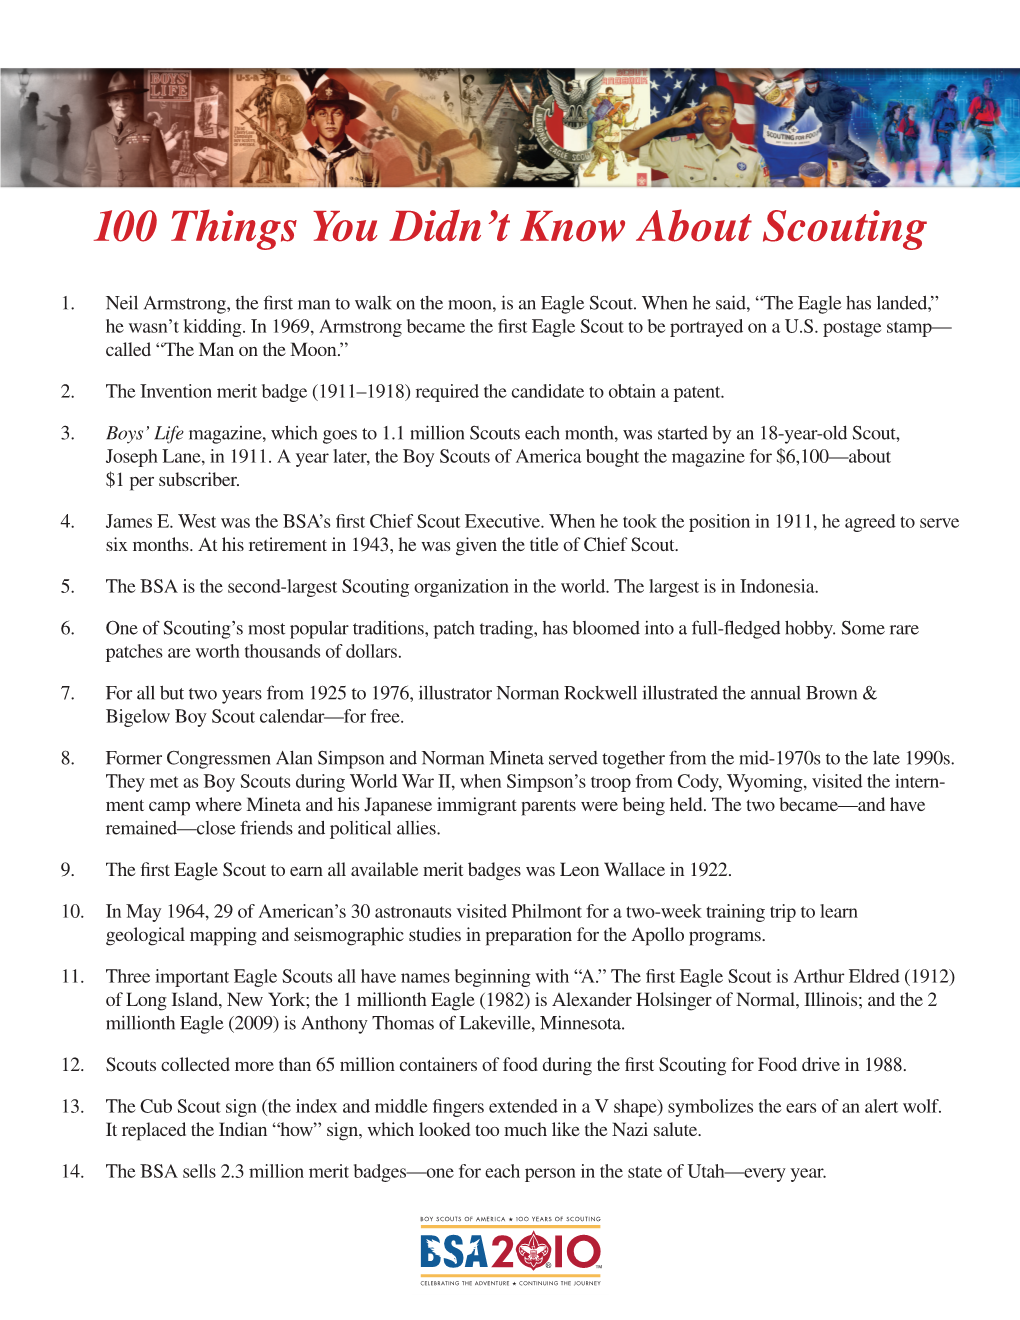 100 Things You Didn't Know About Scouting